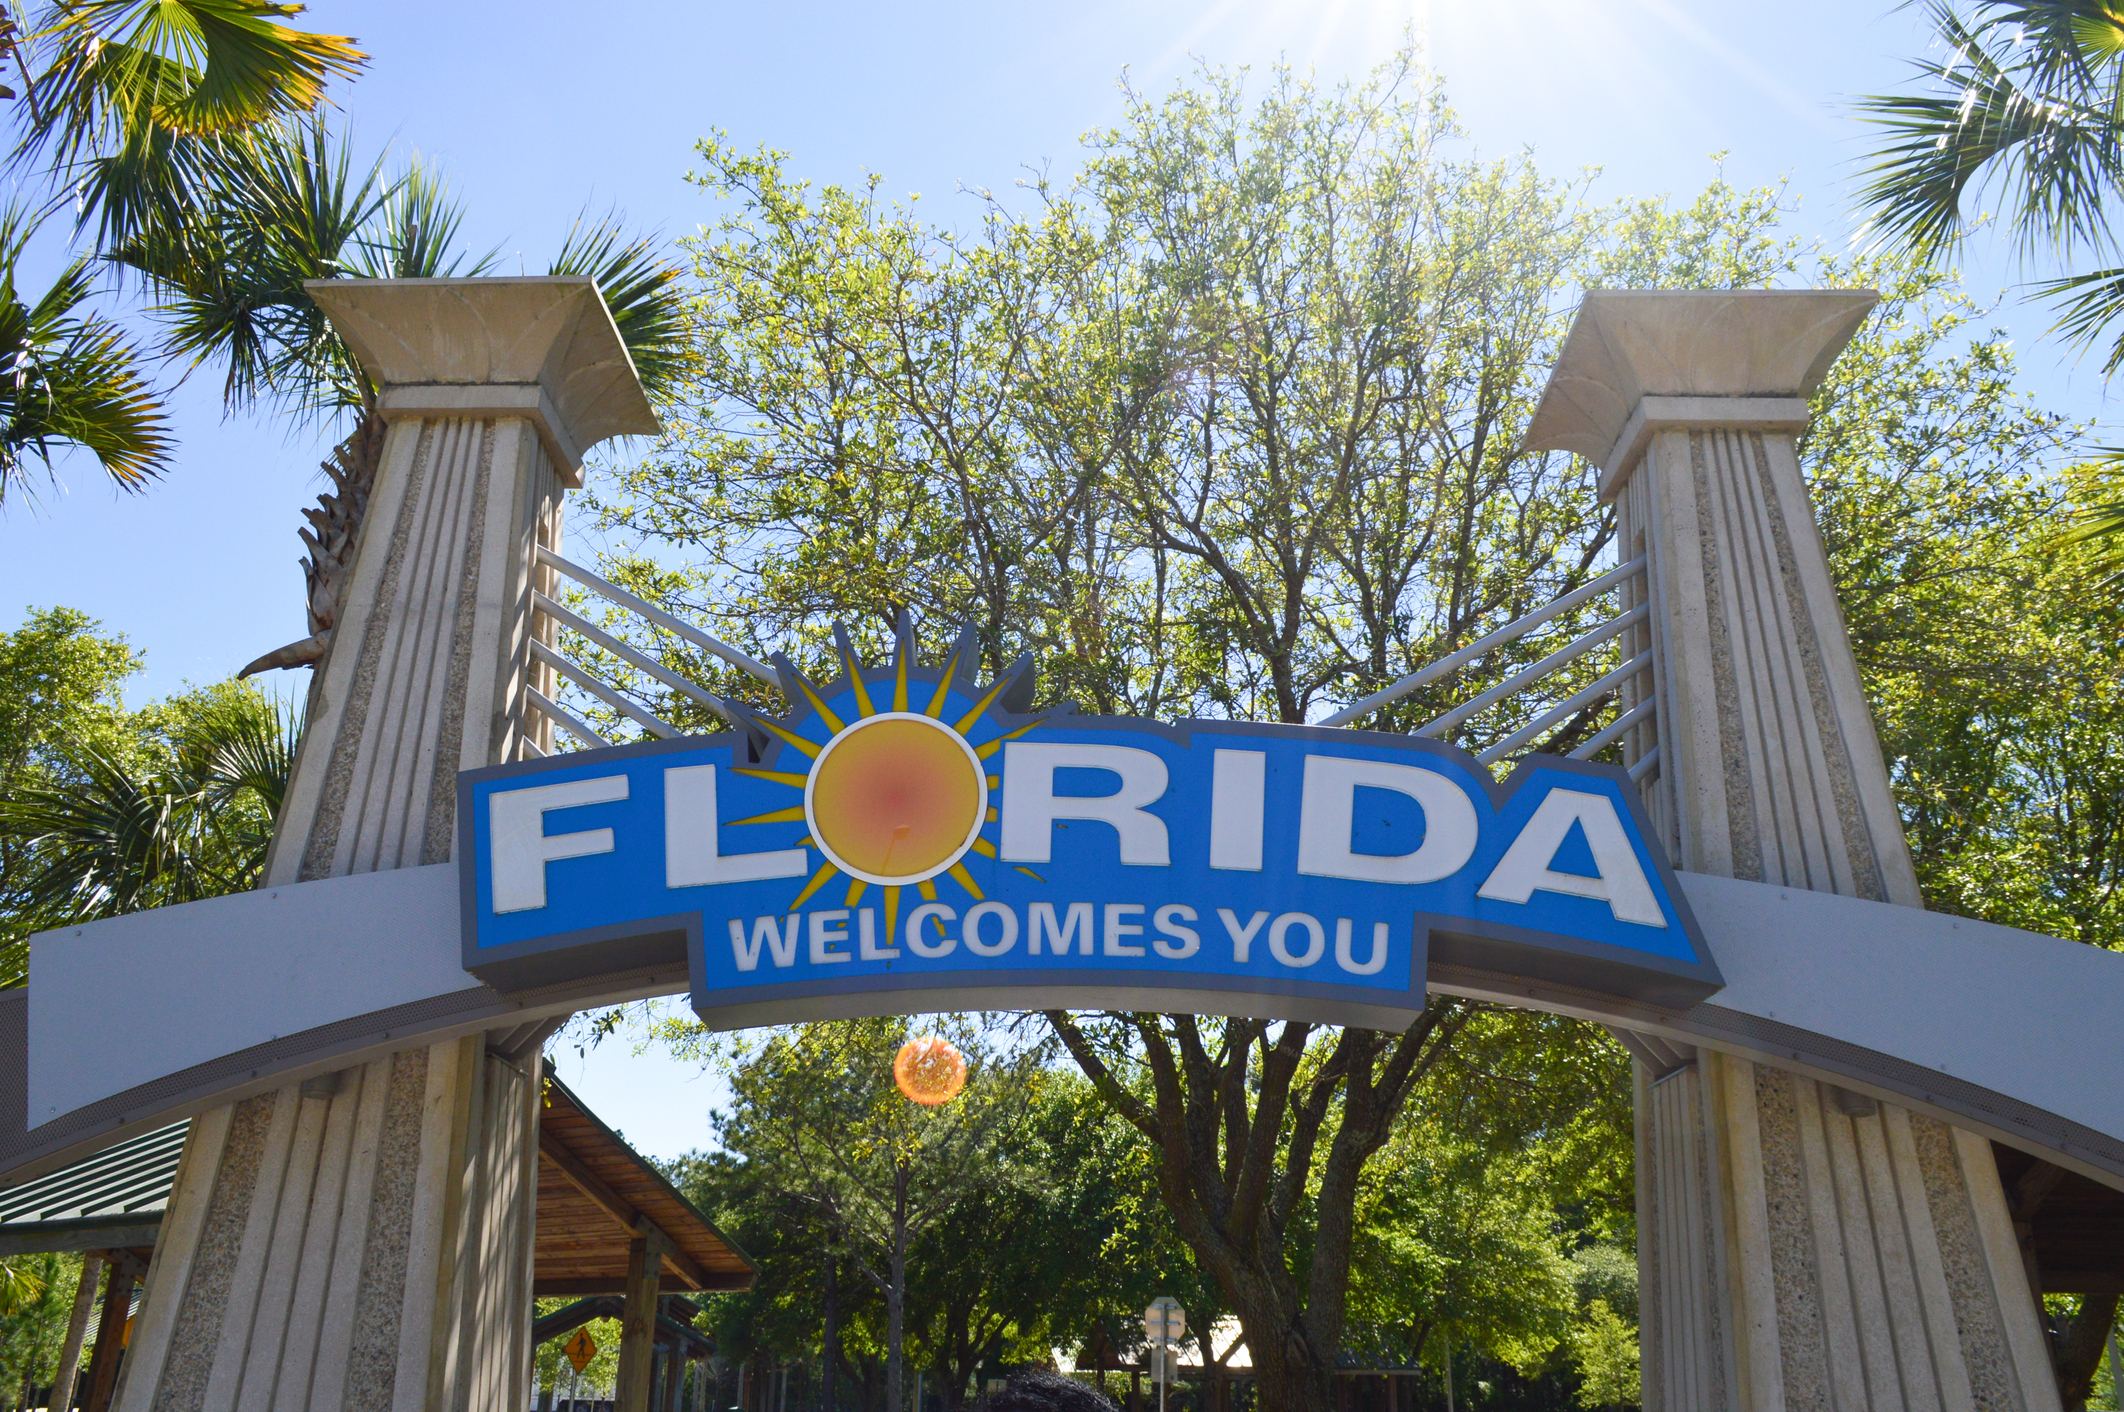   
																Florida Takes 11 of Top 25 Fastest-Growing Cities 
															 